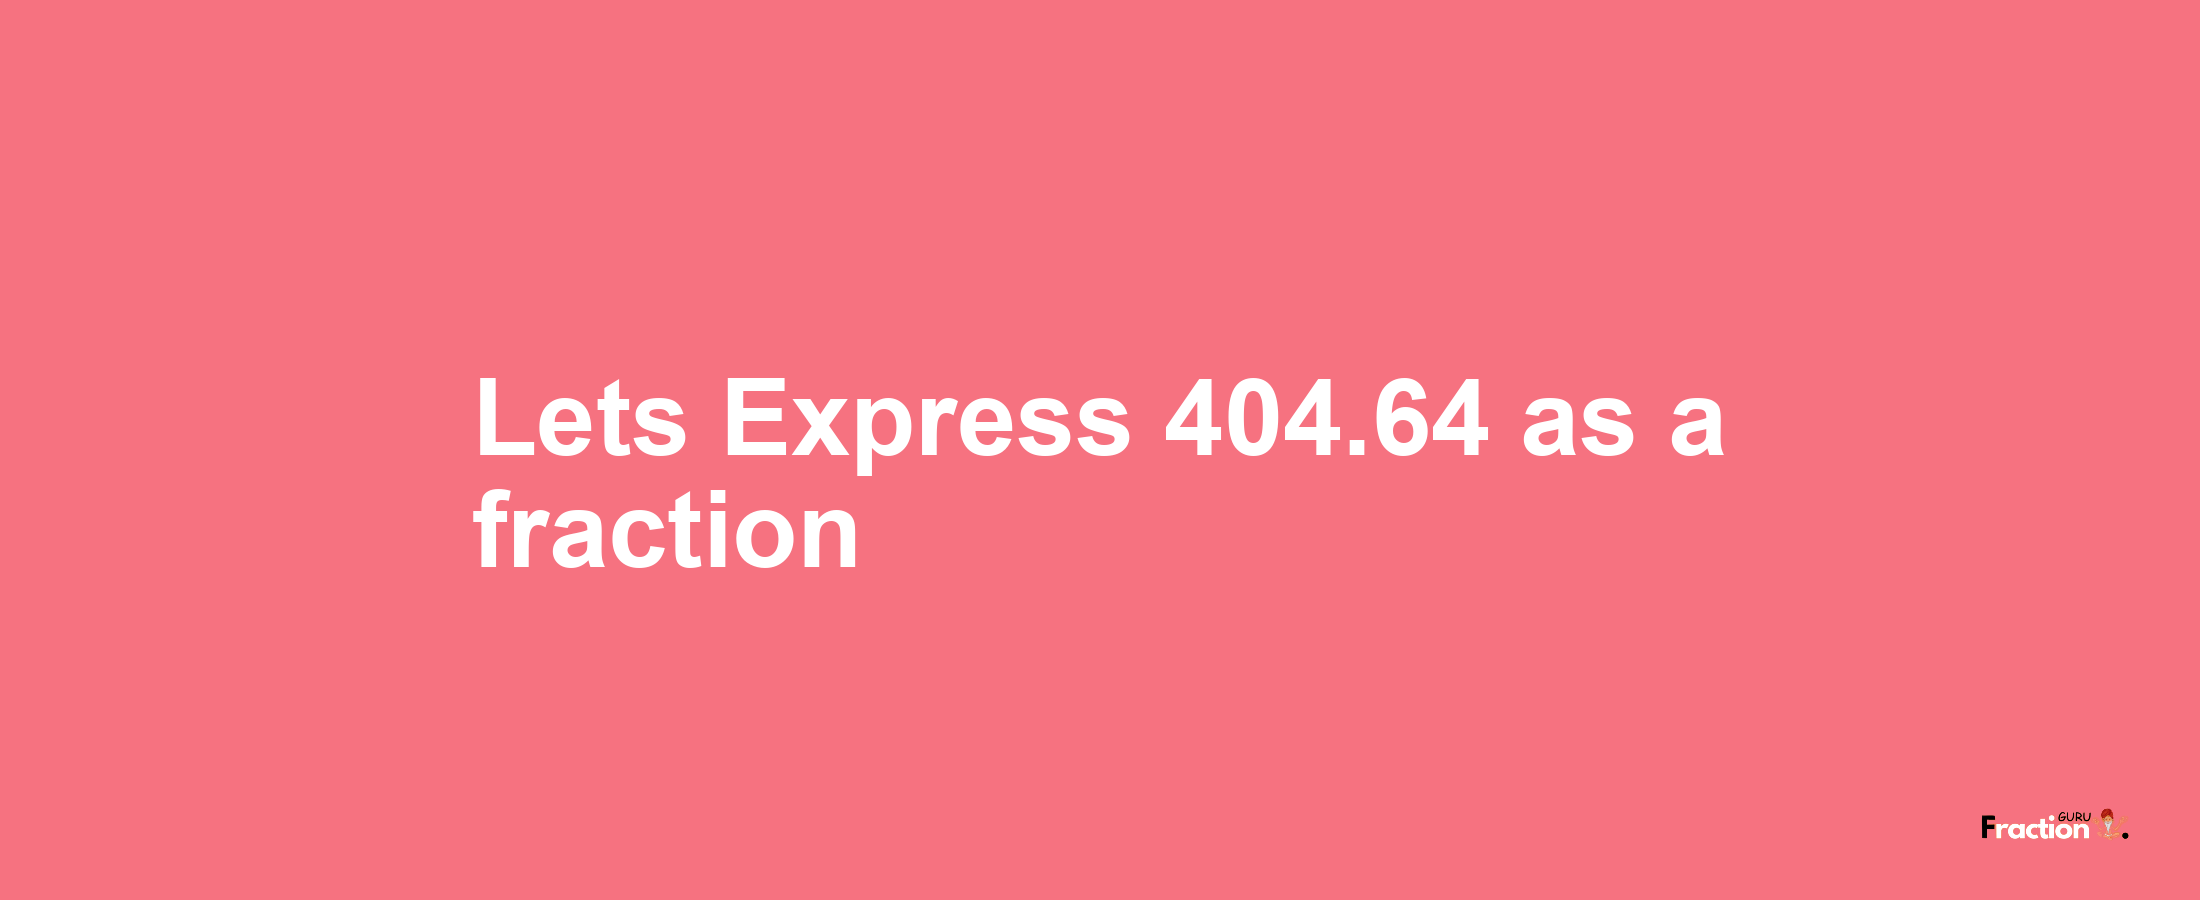 Lets Express 404.64 as afraction